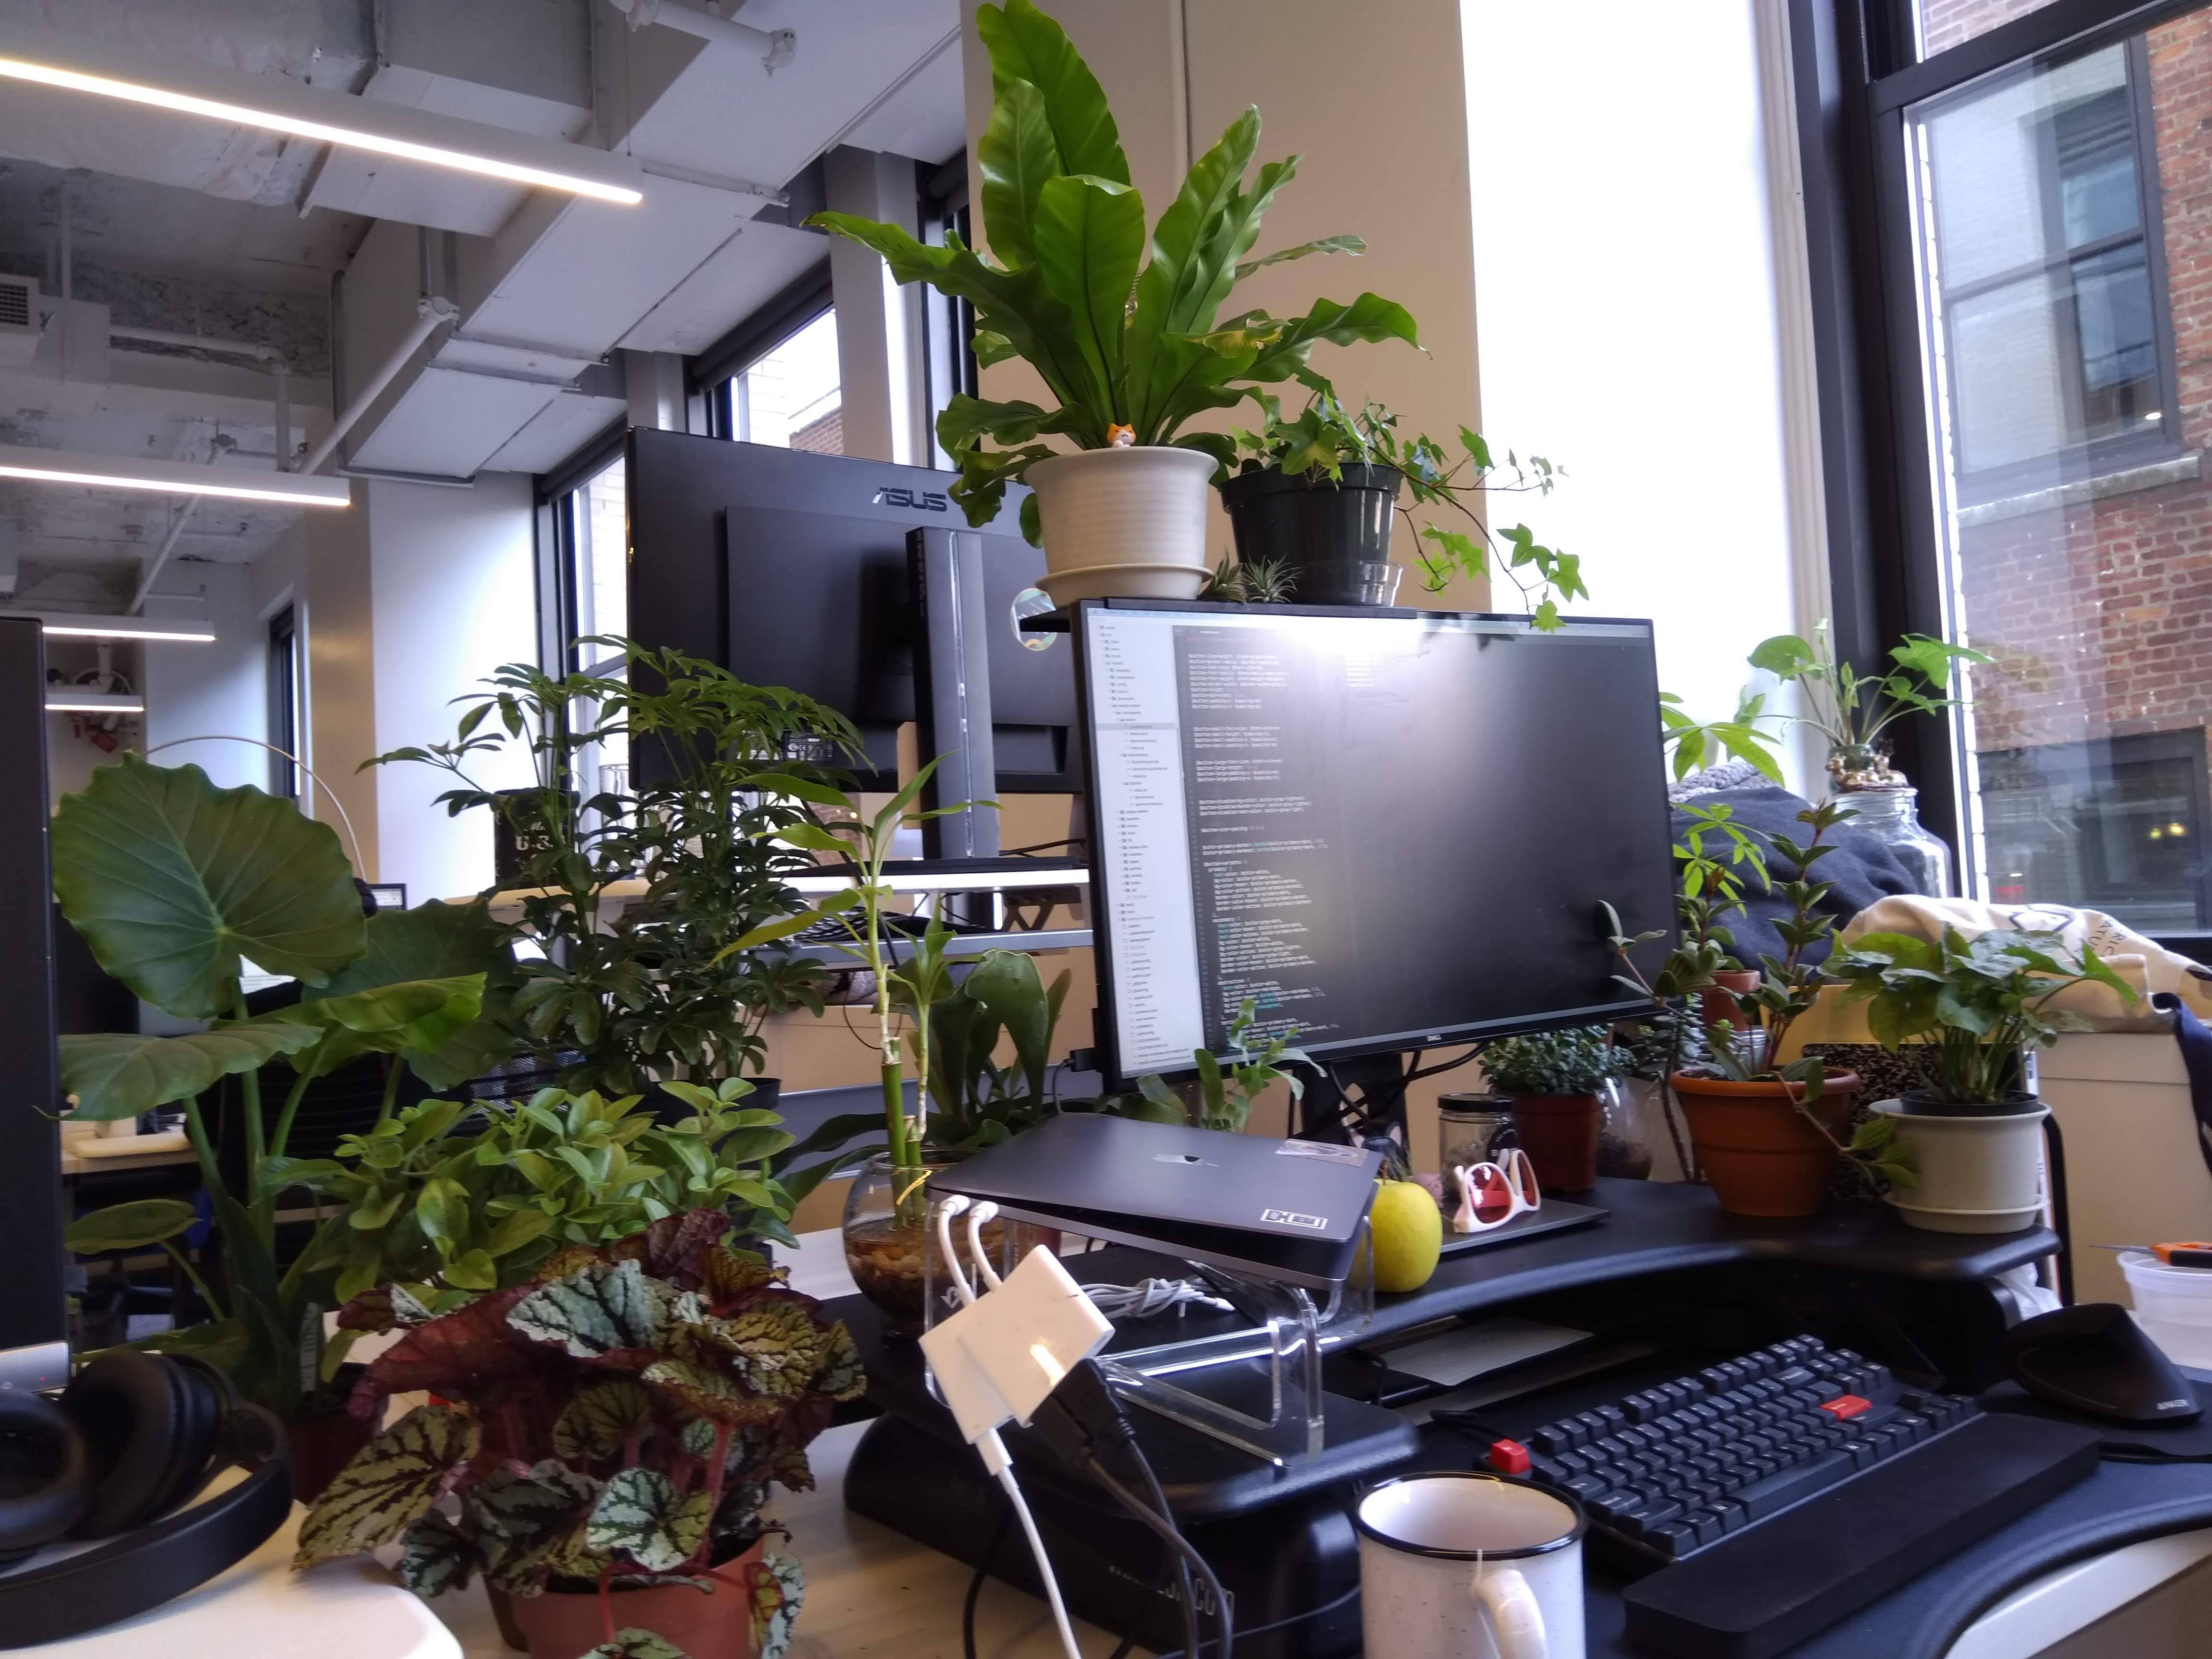 Laptop and monitor surrounded by plants